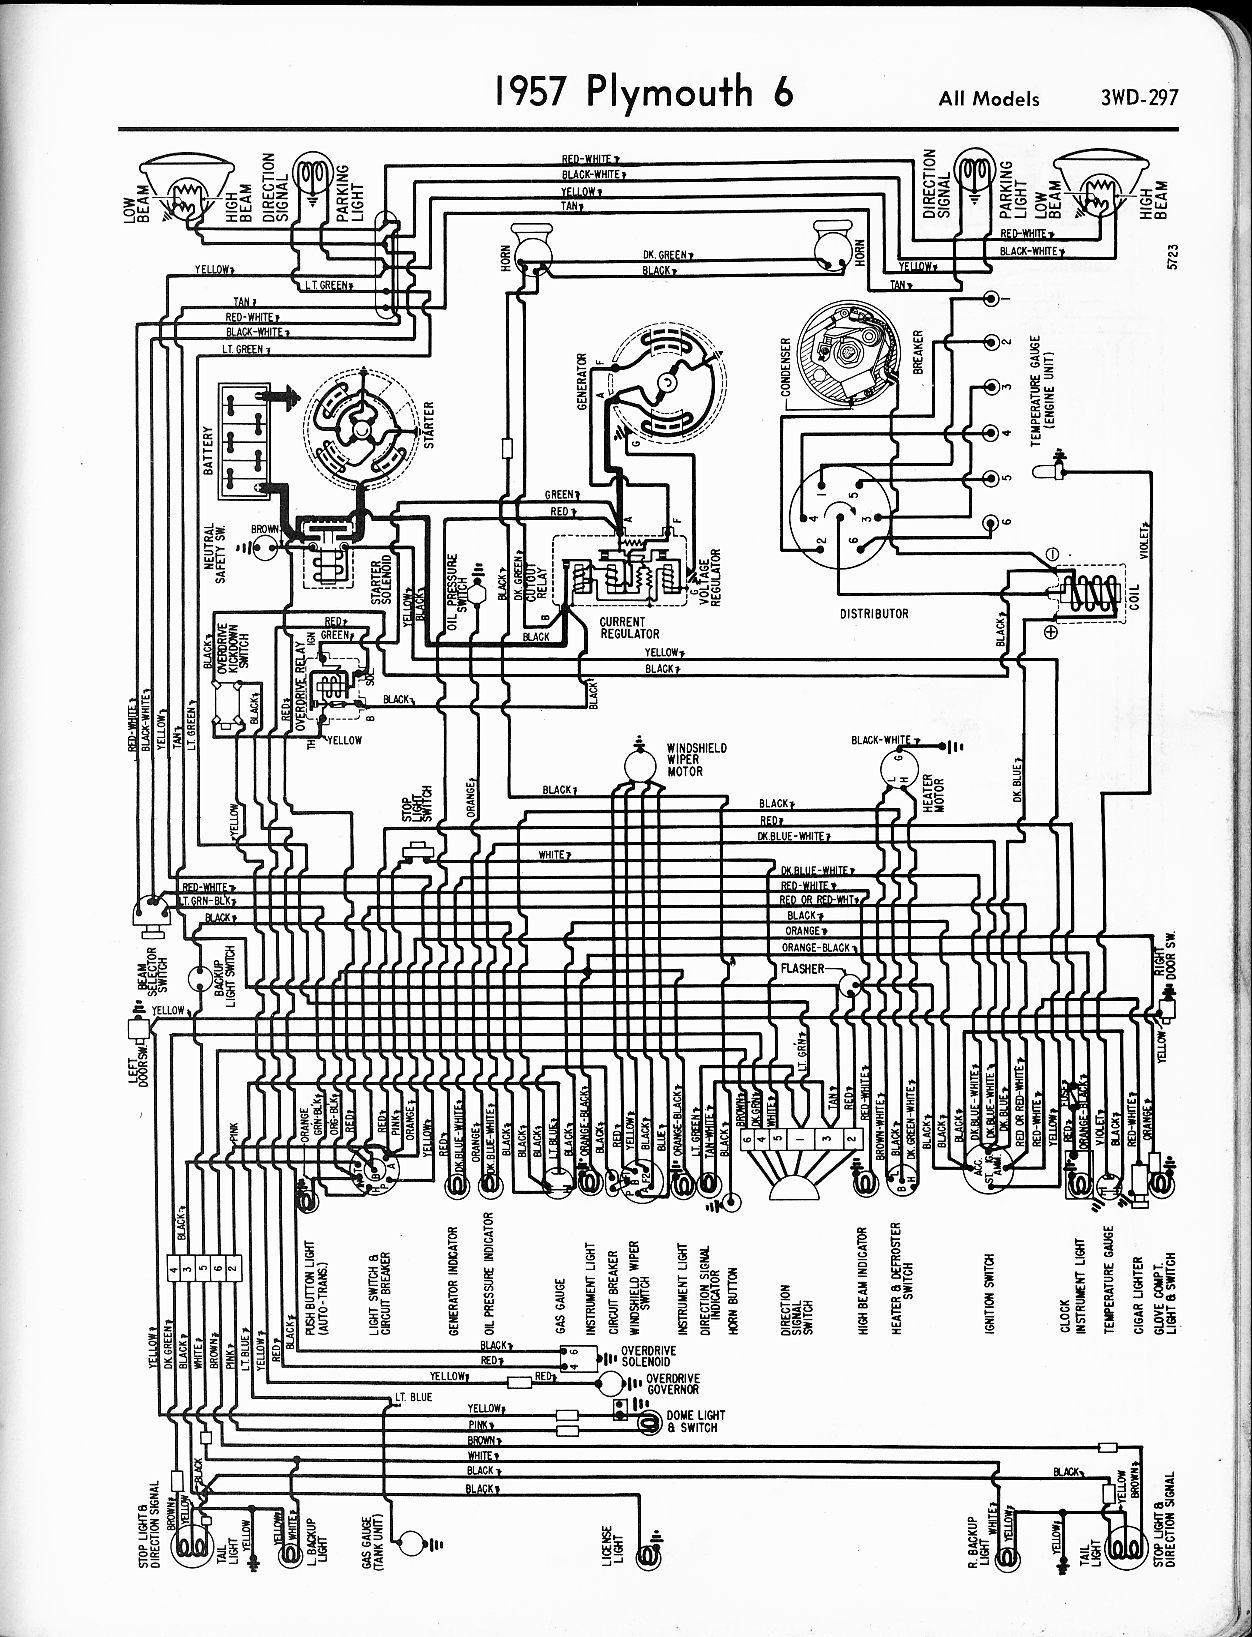 Wiring Diagram For 1966 Plymouth Valiant | schematic and wiring diagram